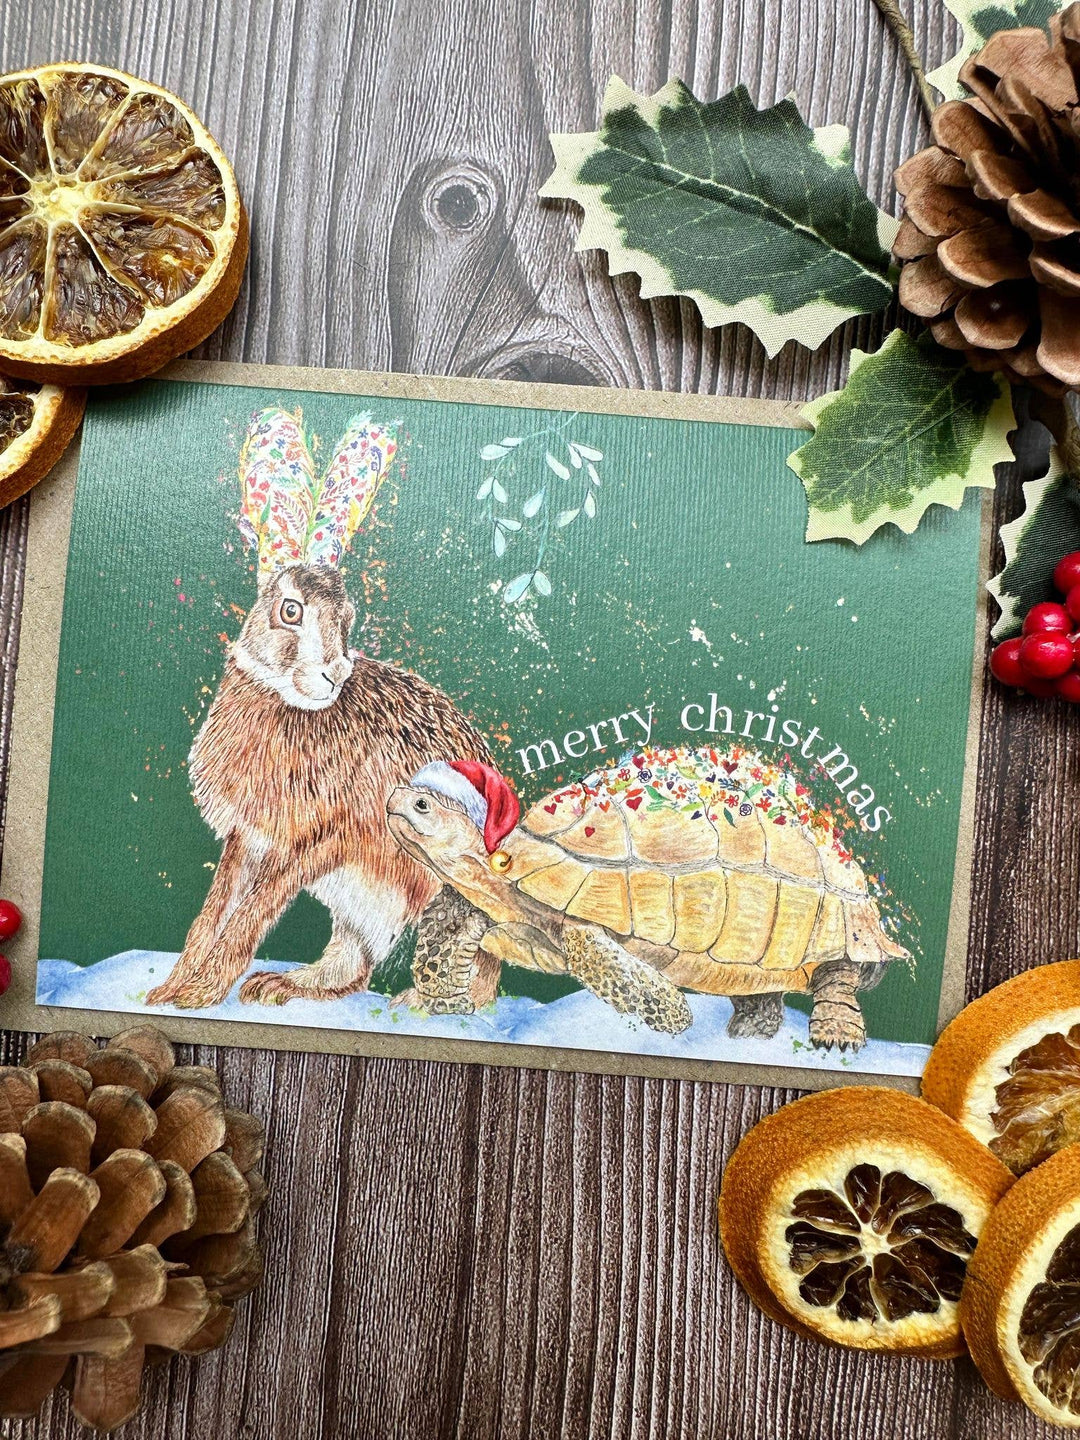 Hare and Tortoise Beautiful Christmas Eco Friendly card